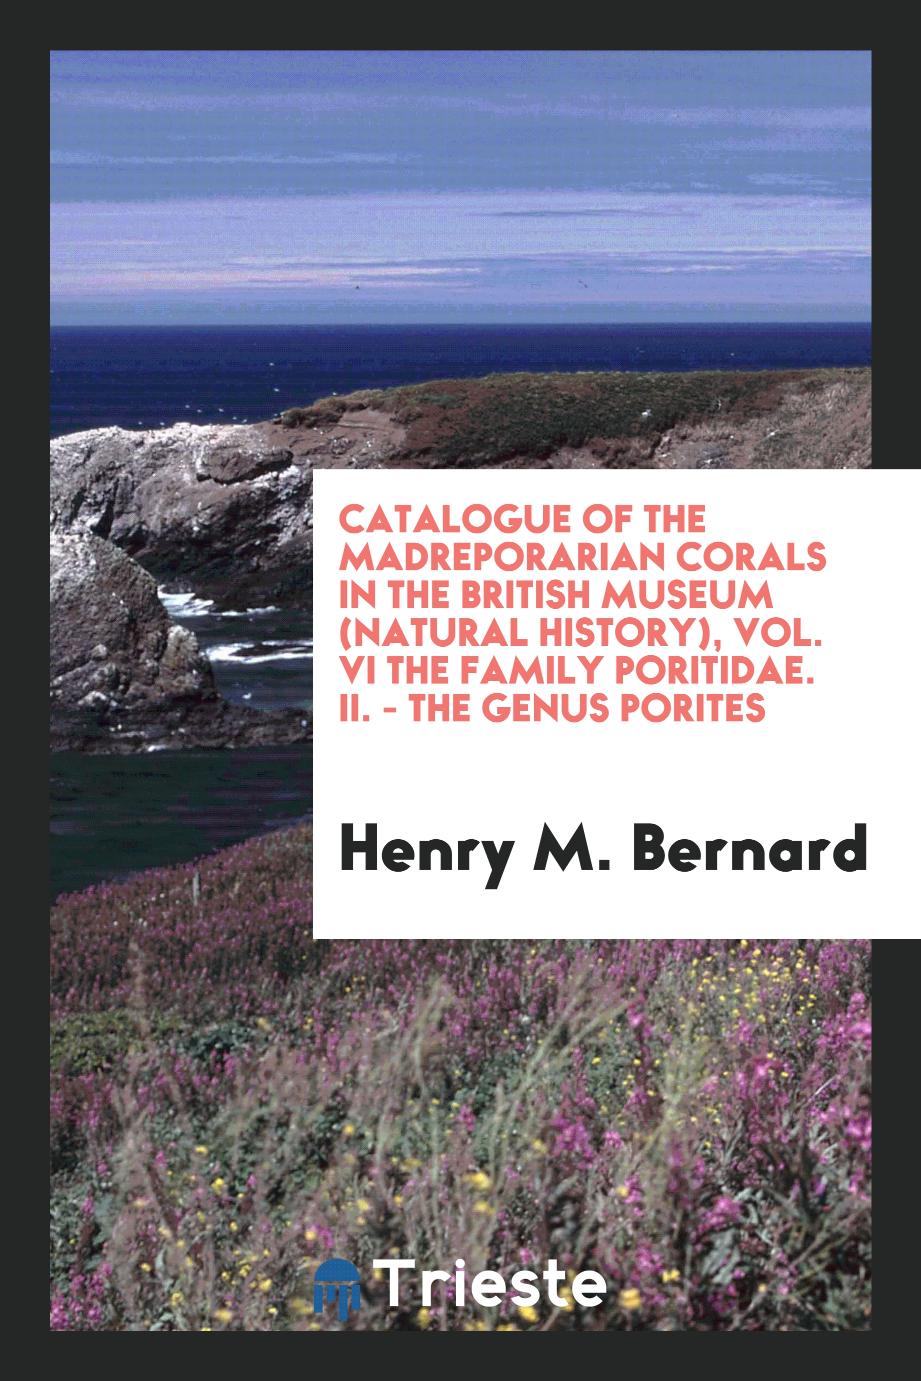 Catalogue of the madreporarian corals in the British Museum (Natural History), Vol. VI The family poritidae. II. - The Genus porites